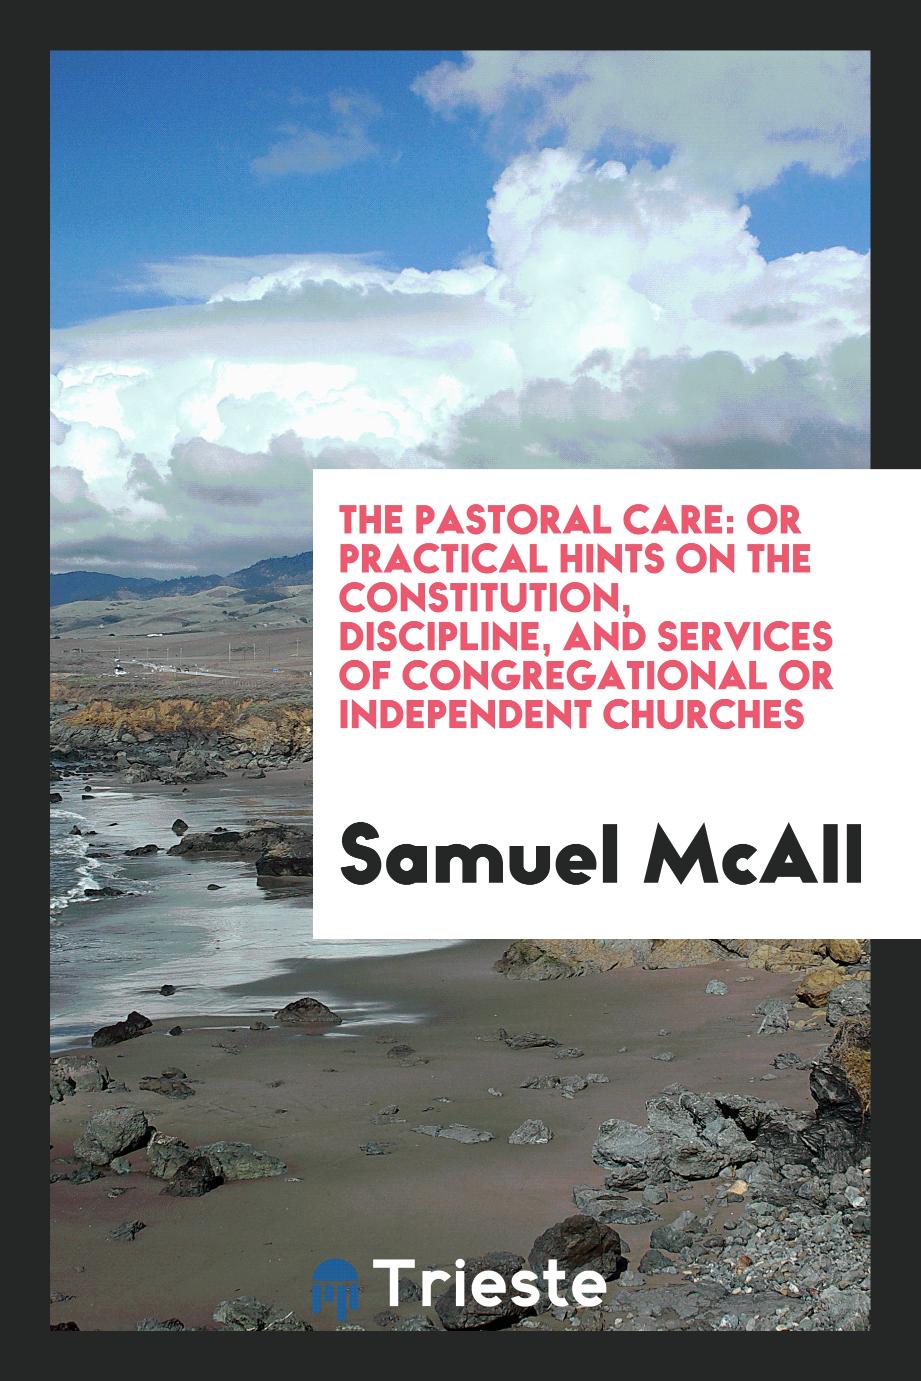 The Pastoral Care: Or Practical Hints On The Constitution, Discipline, And Services Of Congregational Or Independent Churches